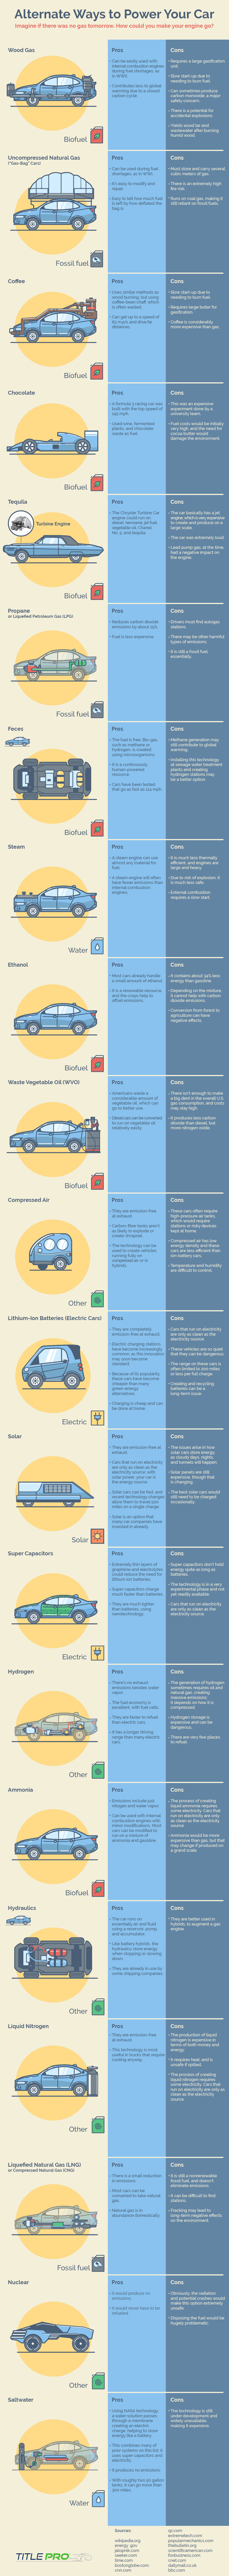 Towards a Gas-less World: 21 Alternative Ways to Power Your Car - Infographic